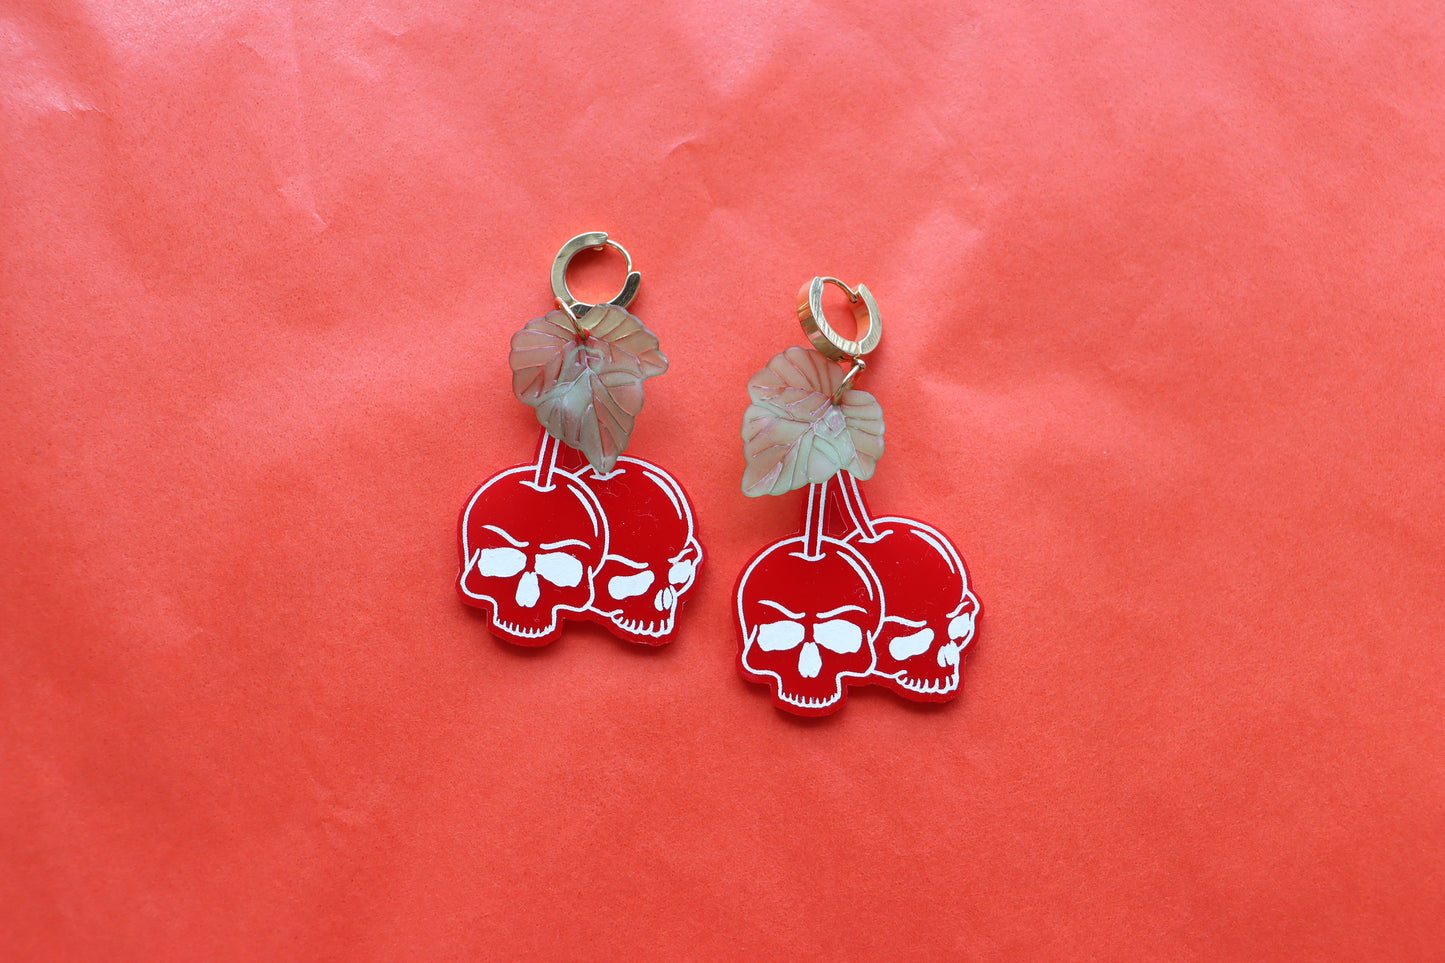 "Dying to Have Fun" Cherry Skeleton Earrings